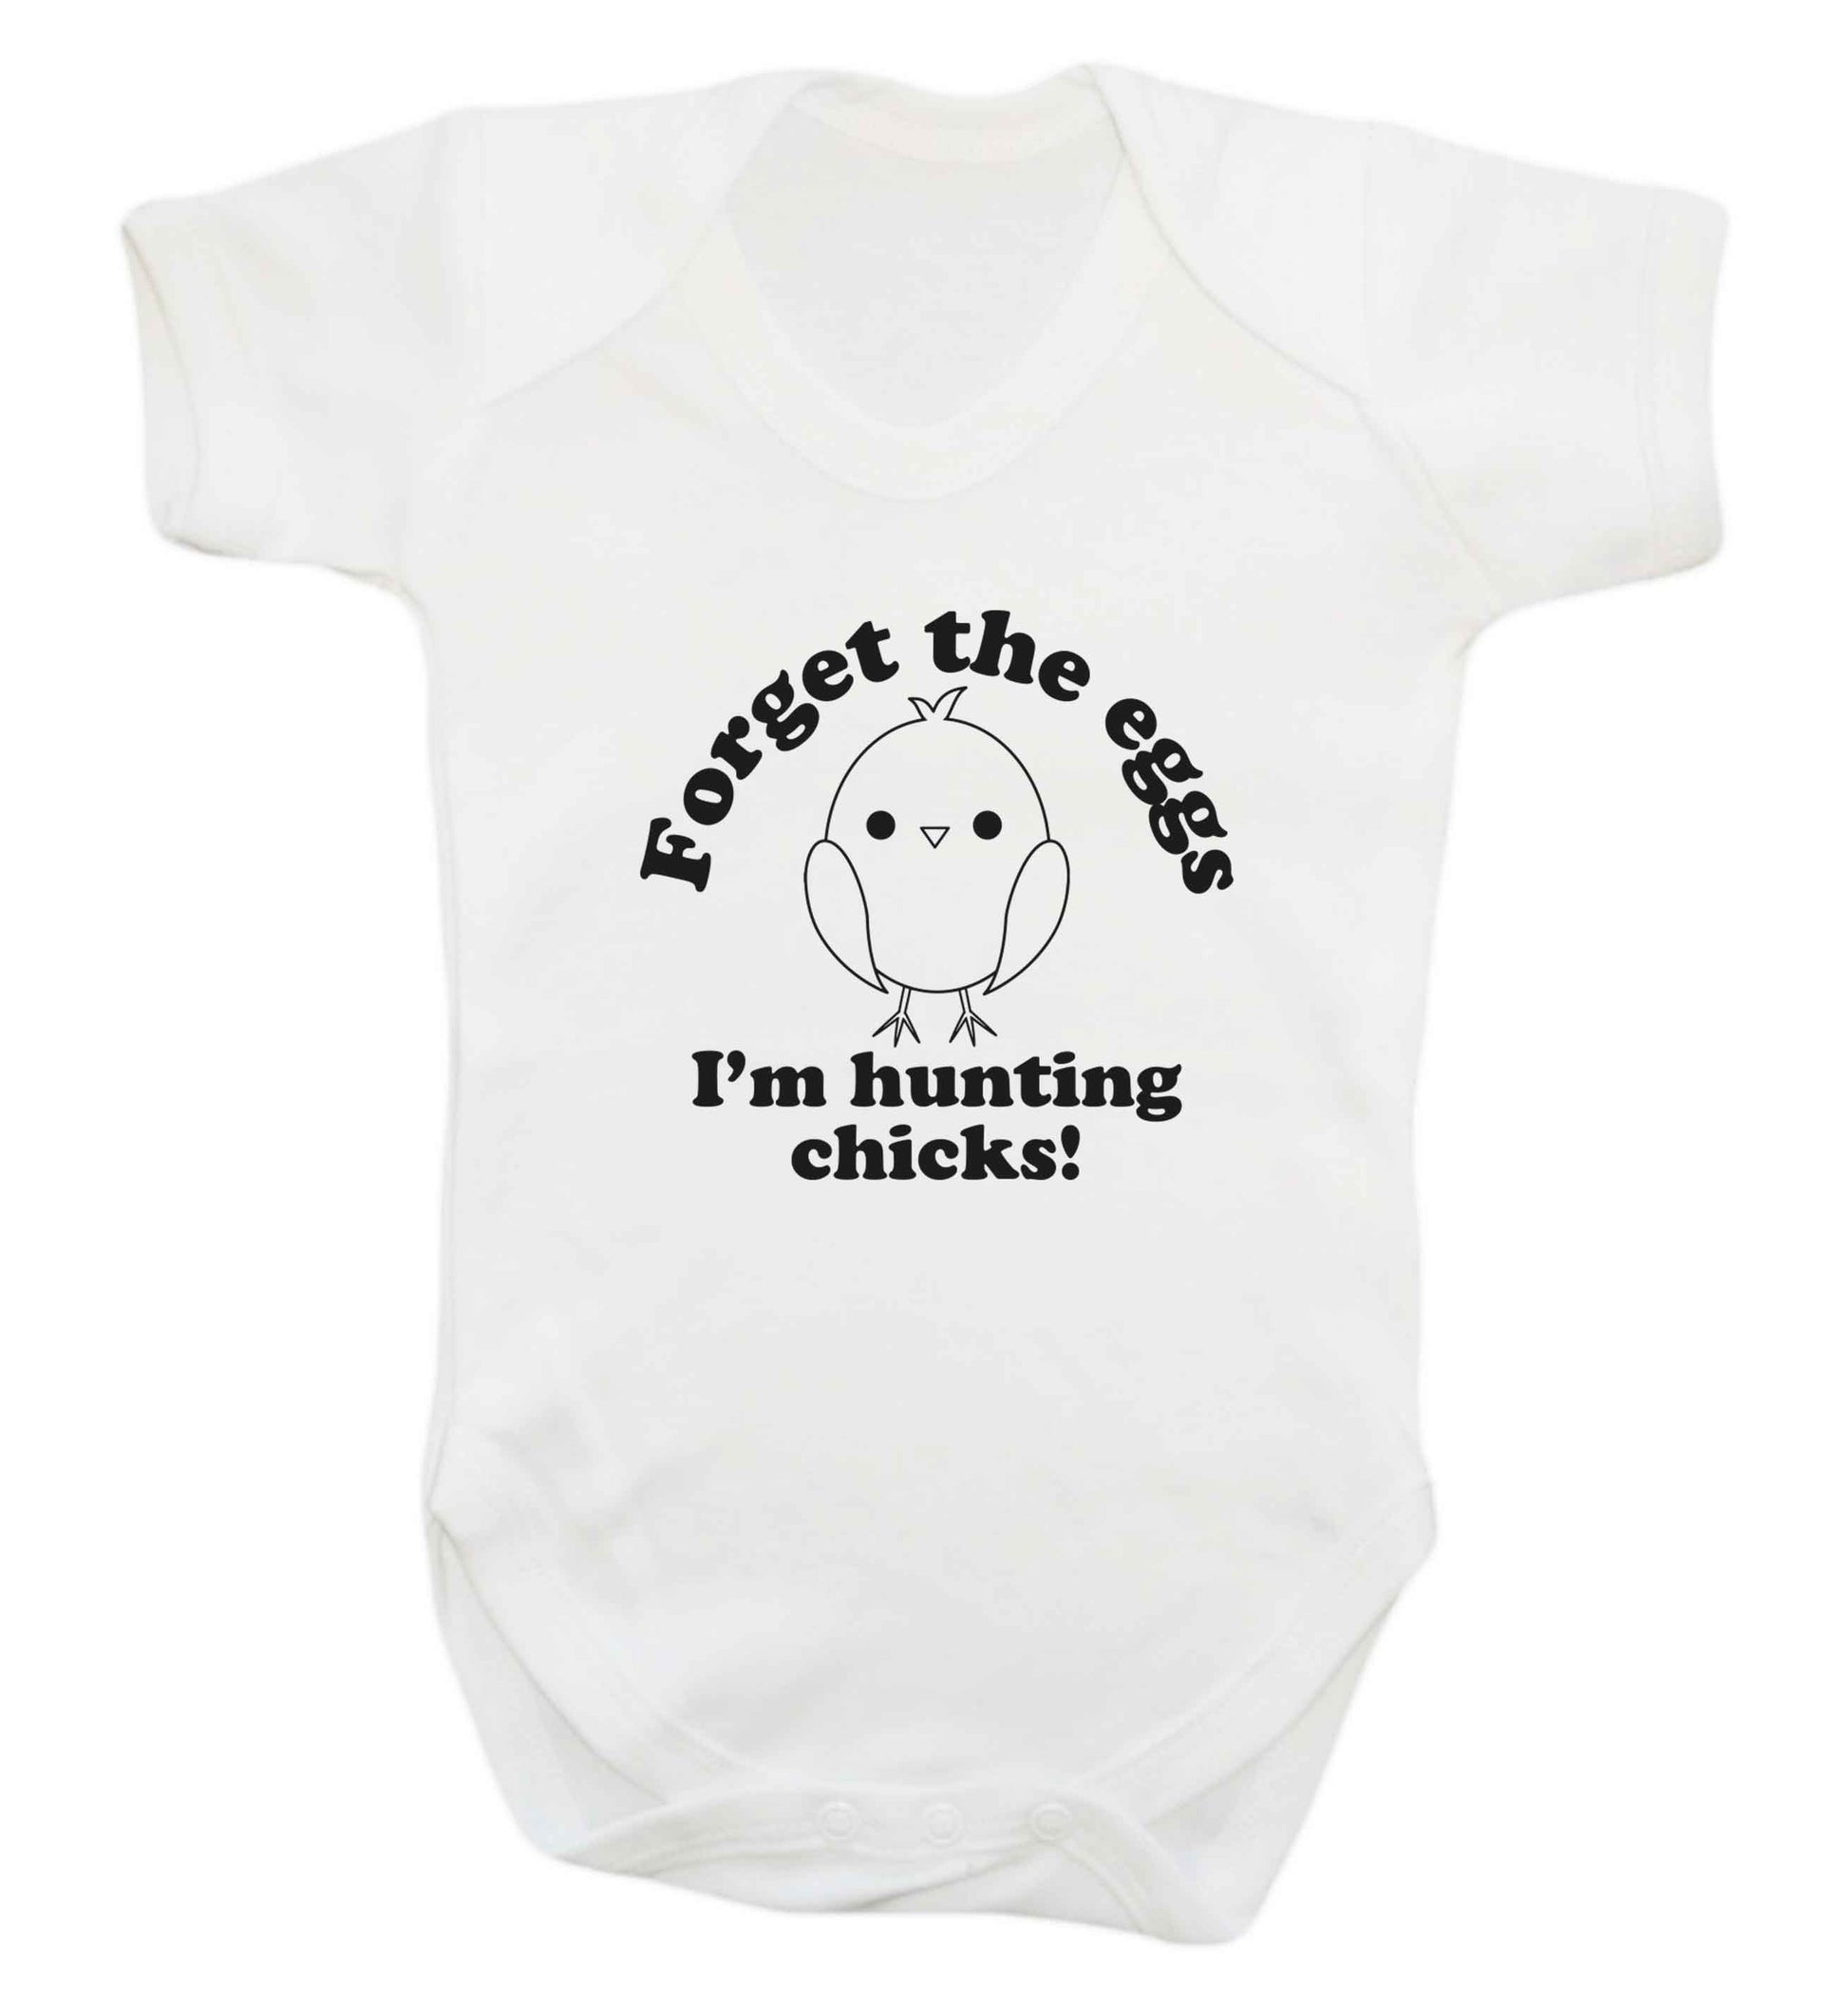 Forget the eggs I'm hunting chicks! baby vest white 18-24 months